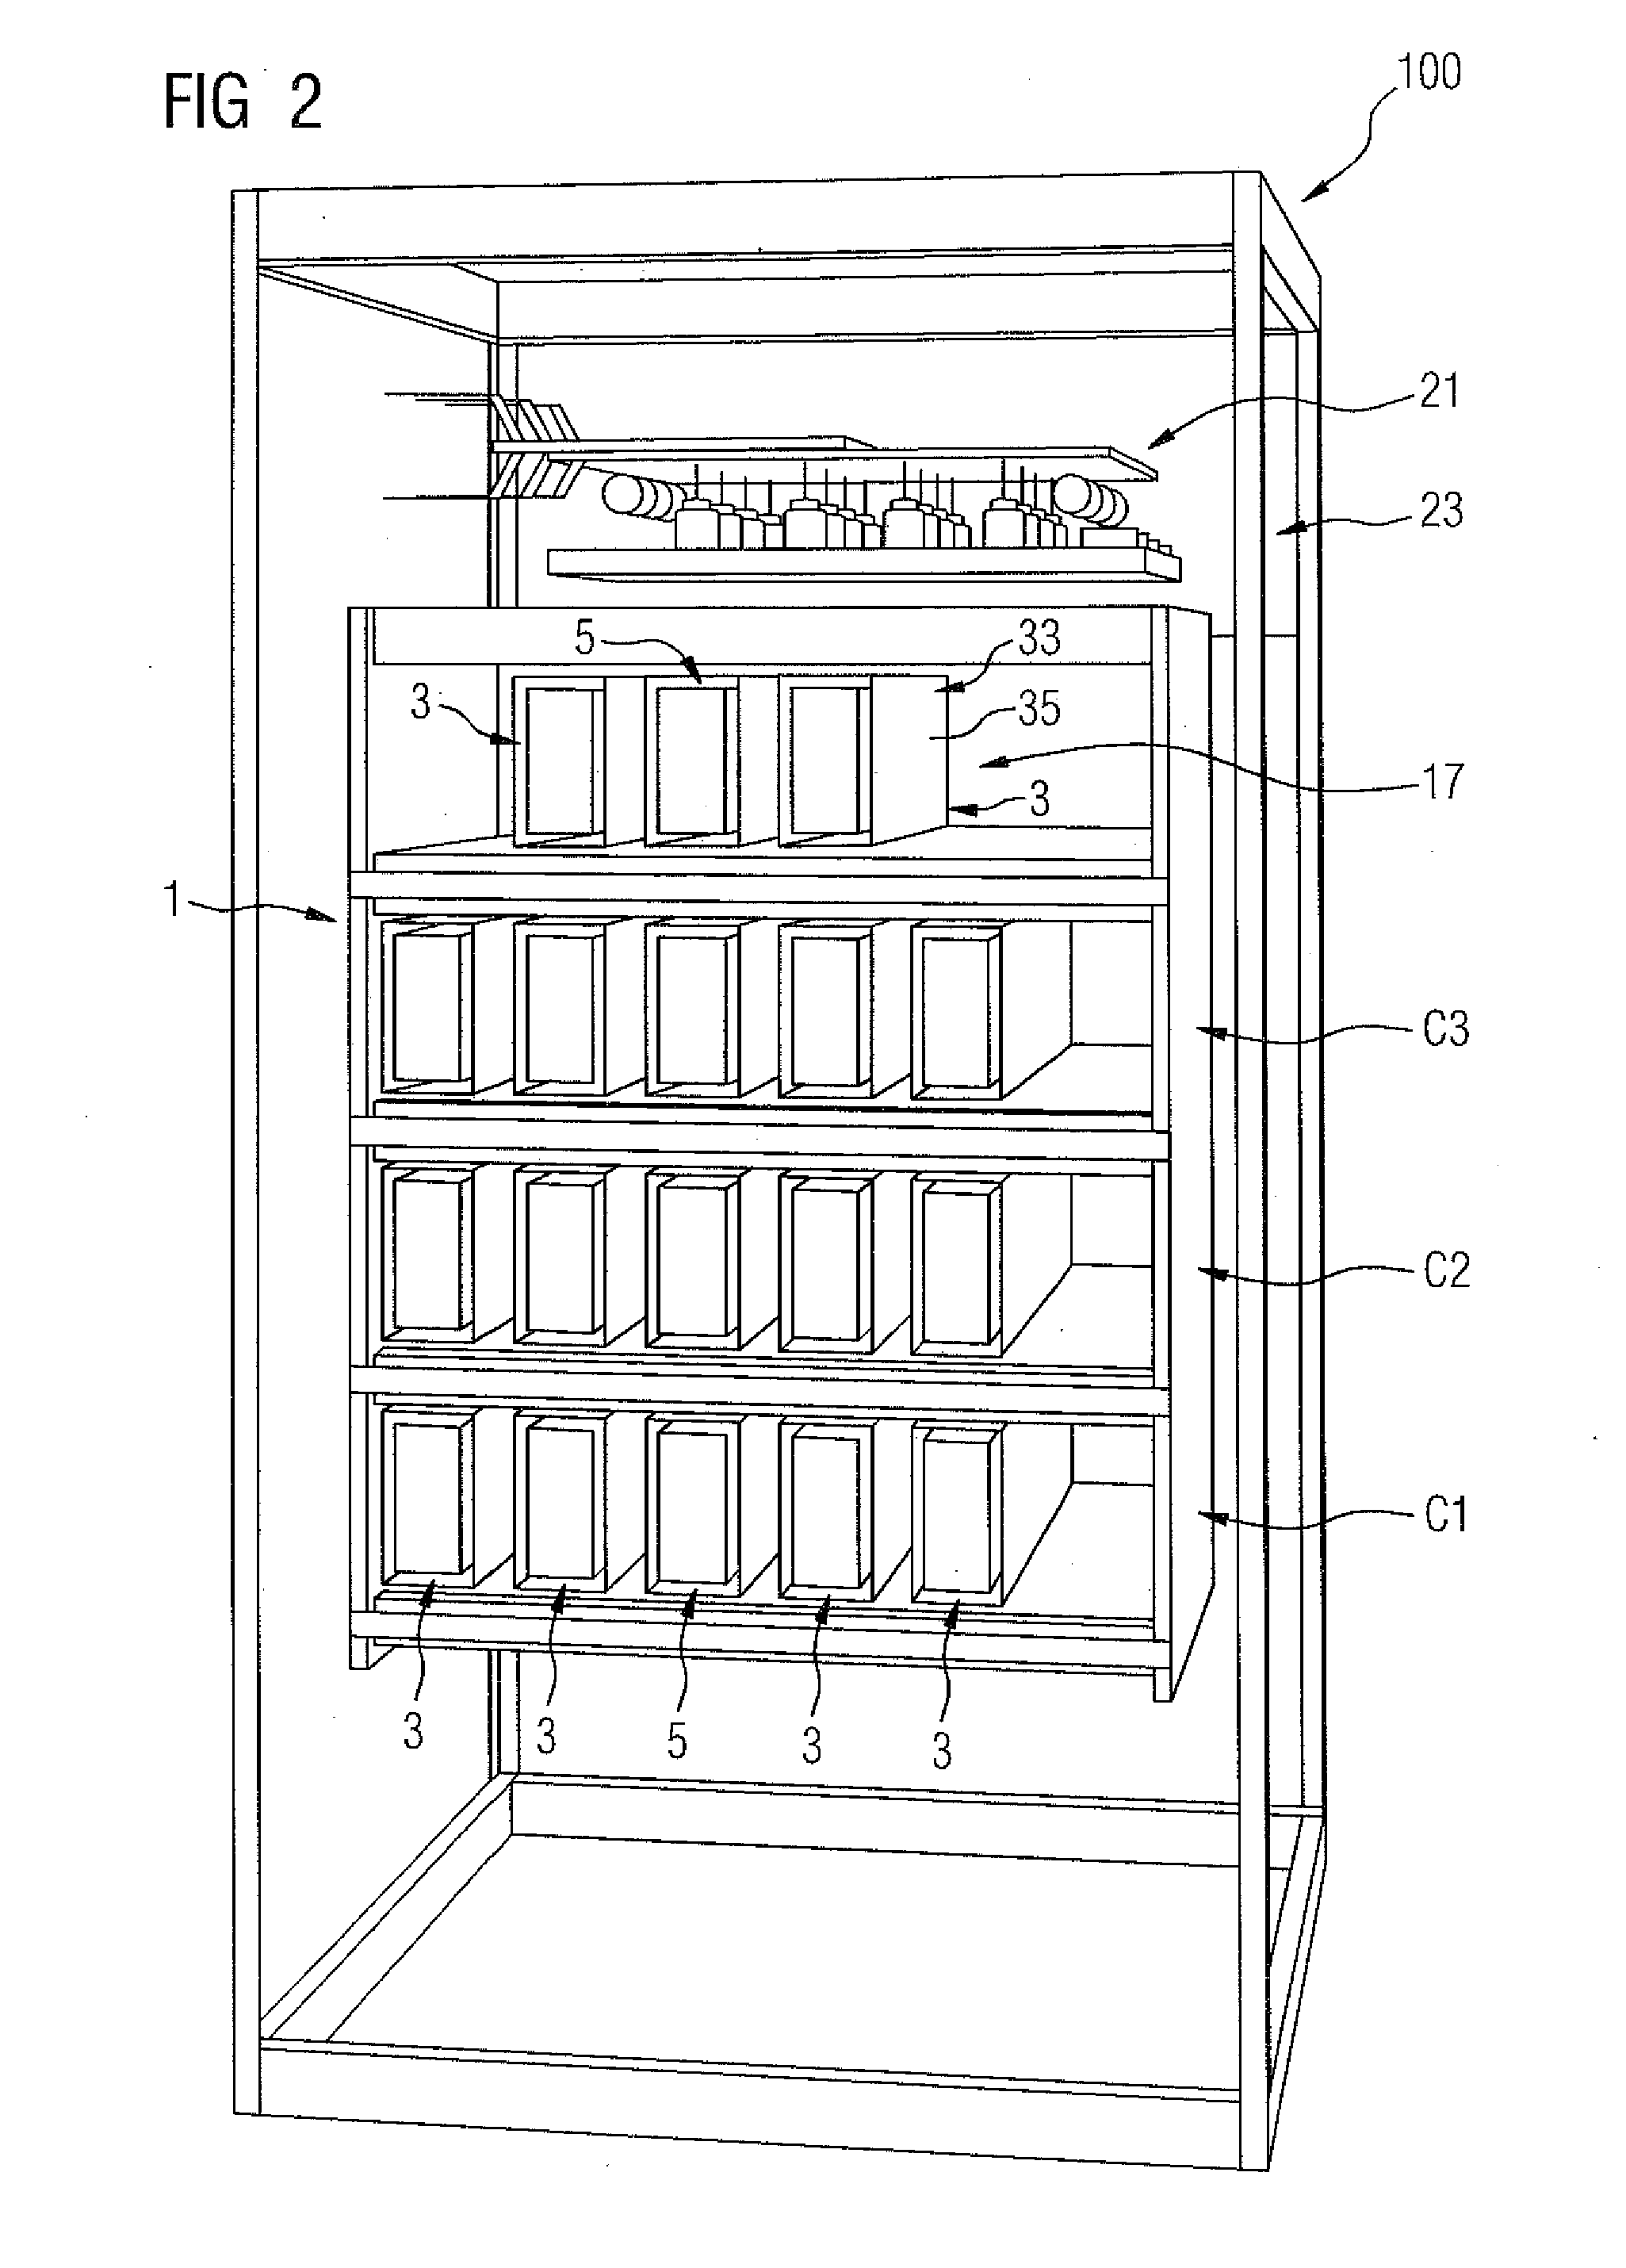 Current converter apparatus having a multi-phase current converter